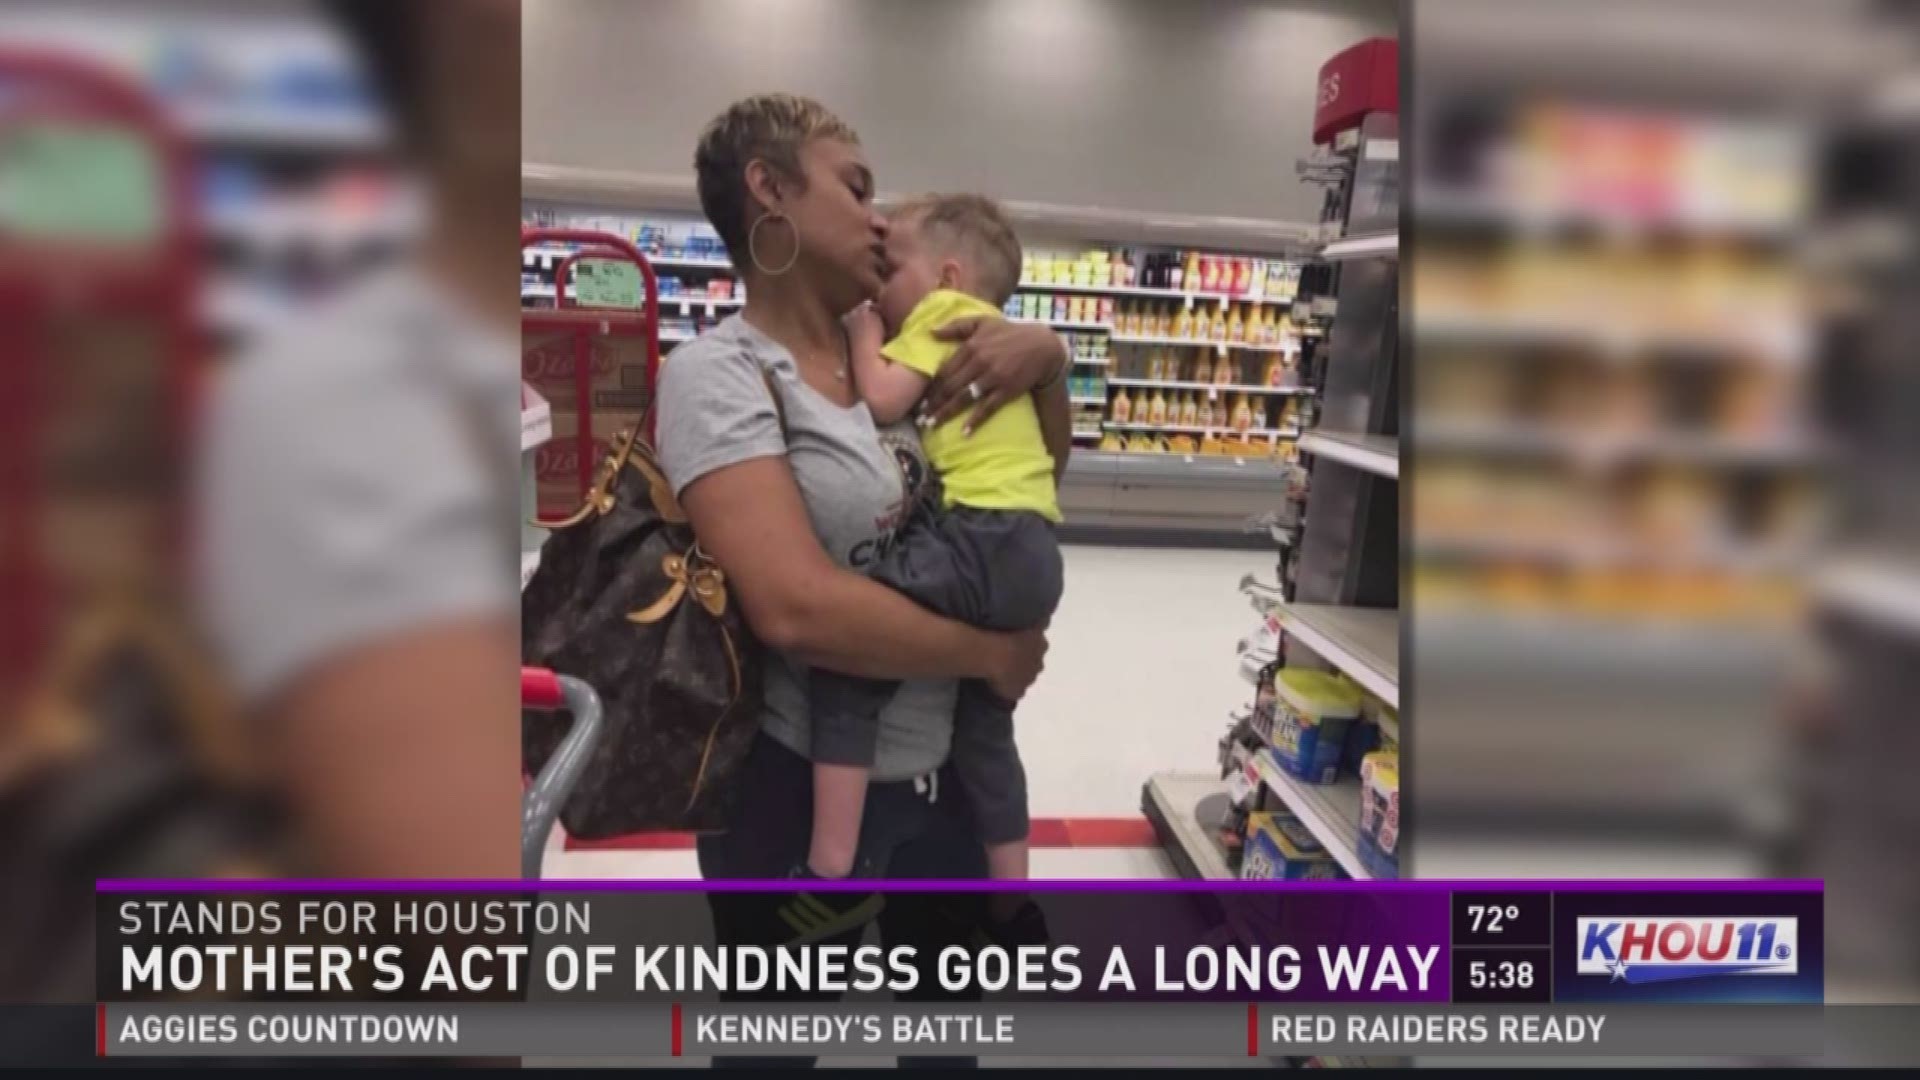 A local mom says she was sleep-deprived and running on empty when a stranger stepped in to help when she needed it most.